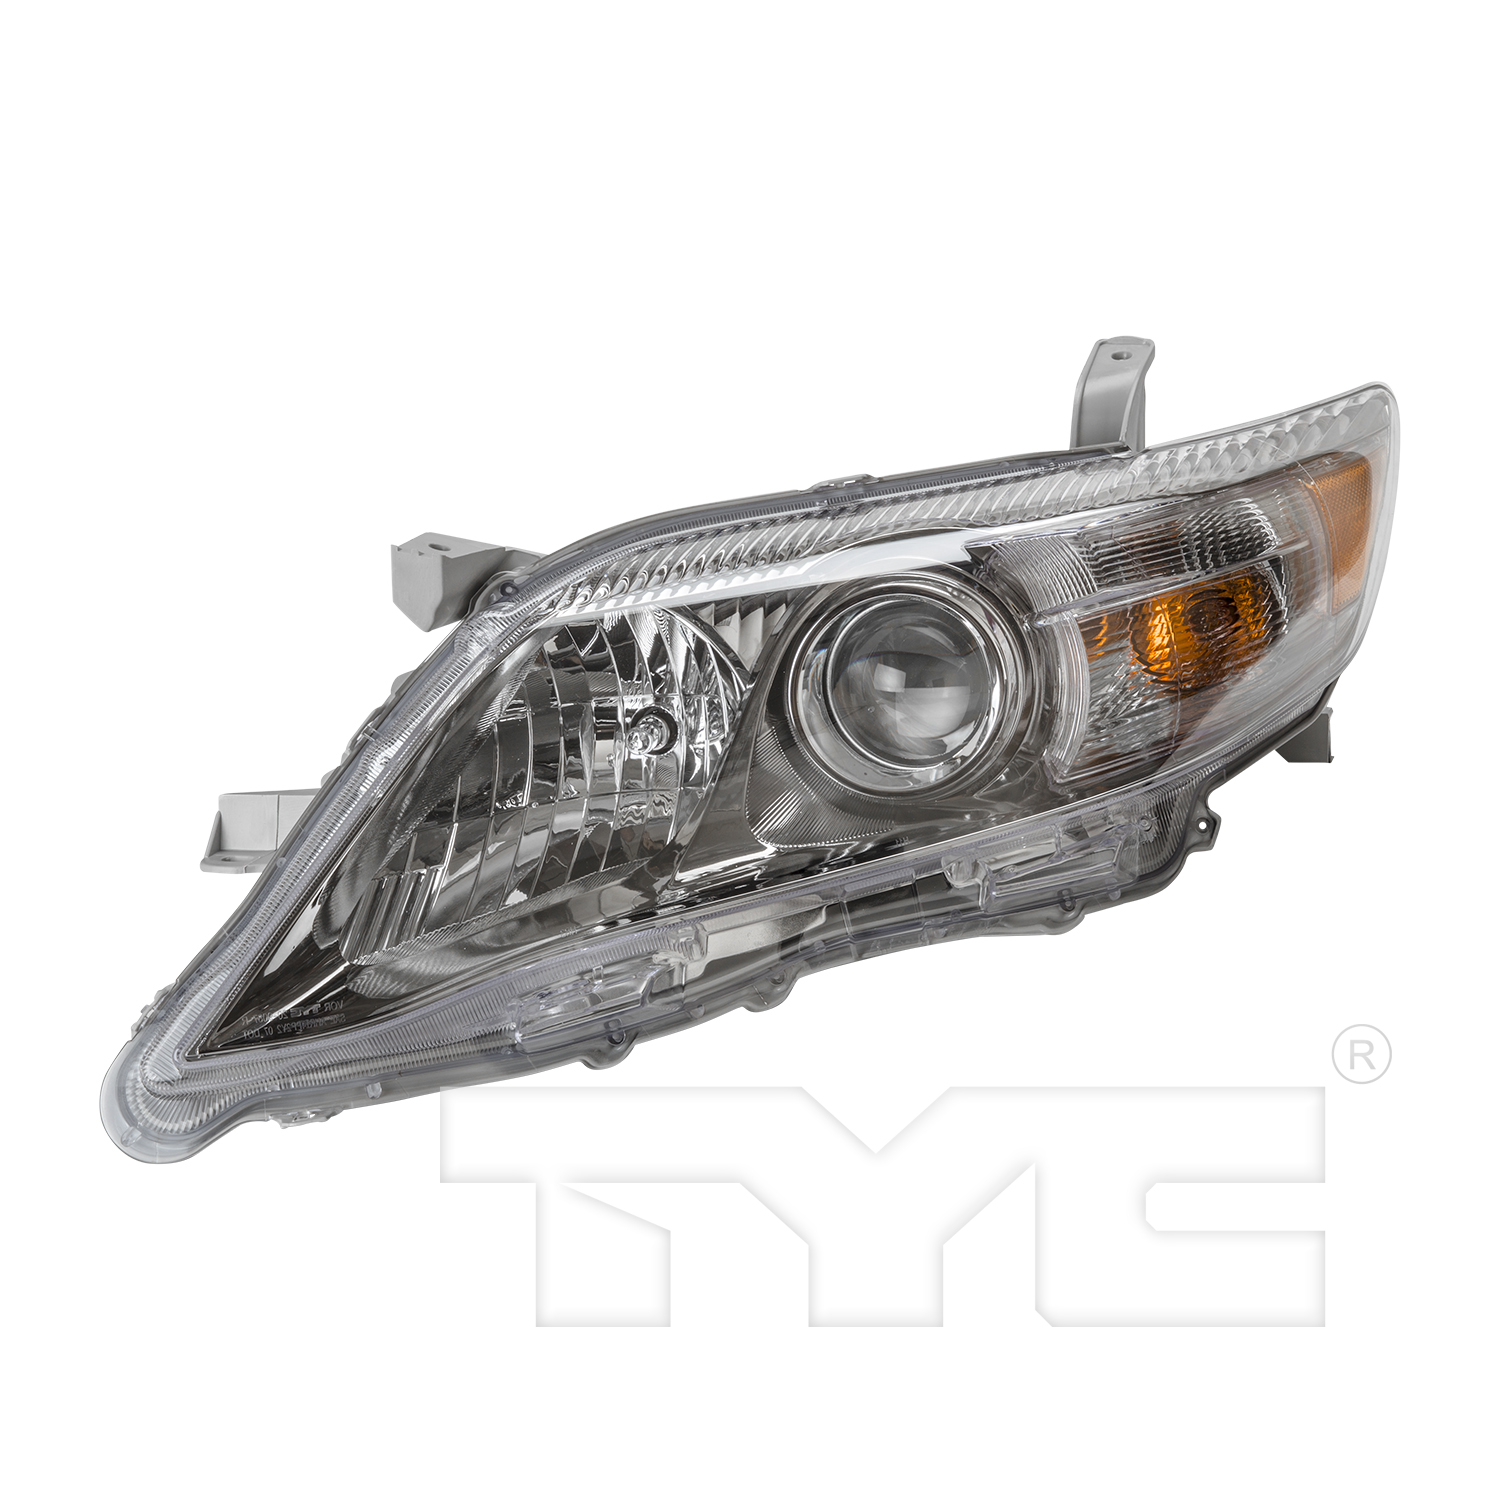 Aftermarket HEADLIGHTS for TOYOTA - CAMRY, CAMRY,10-11,LT Headlamp assy composite